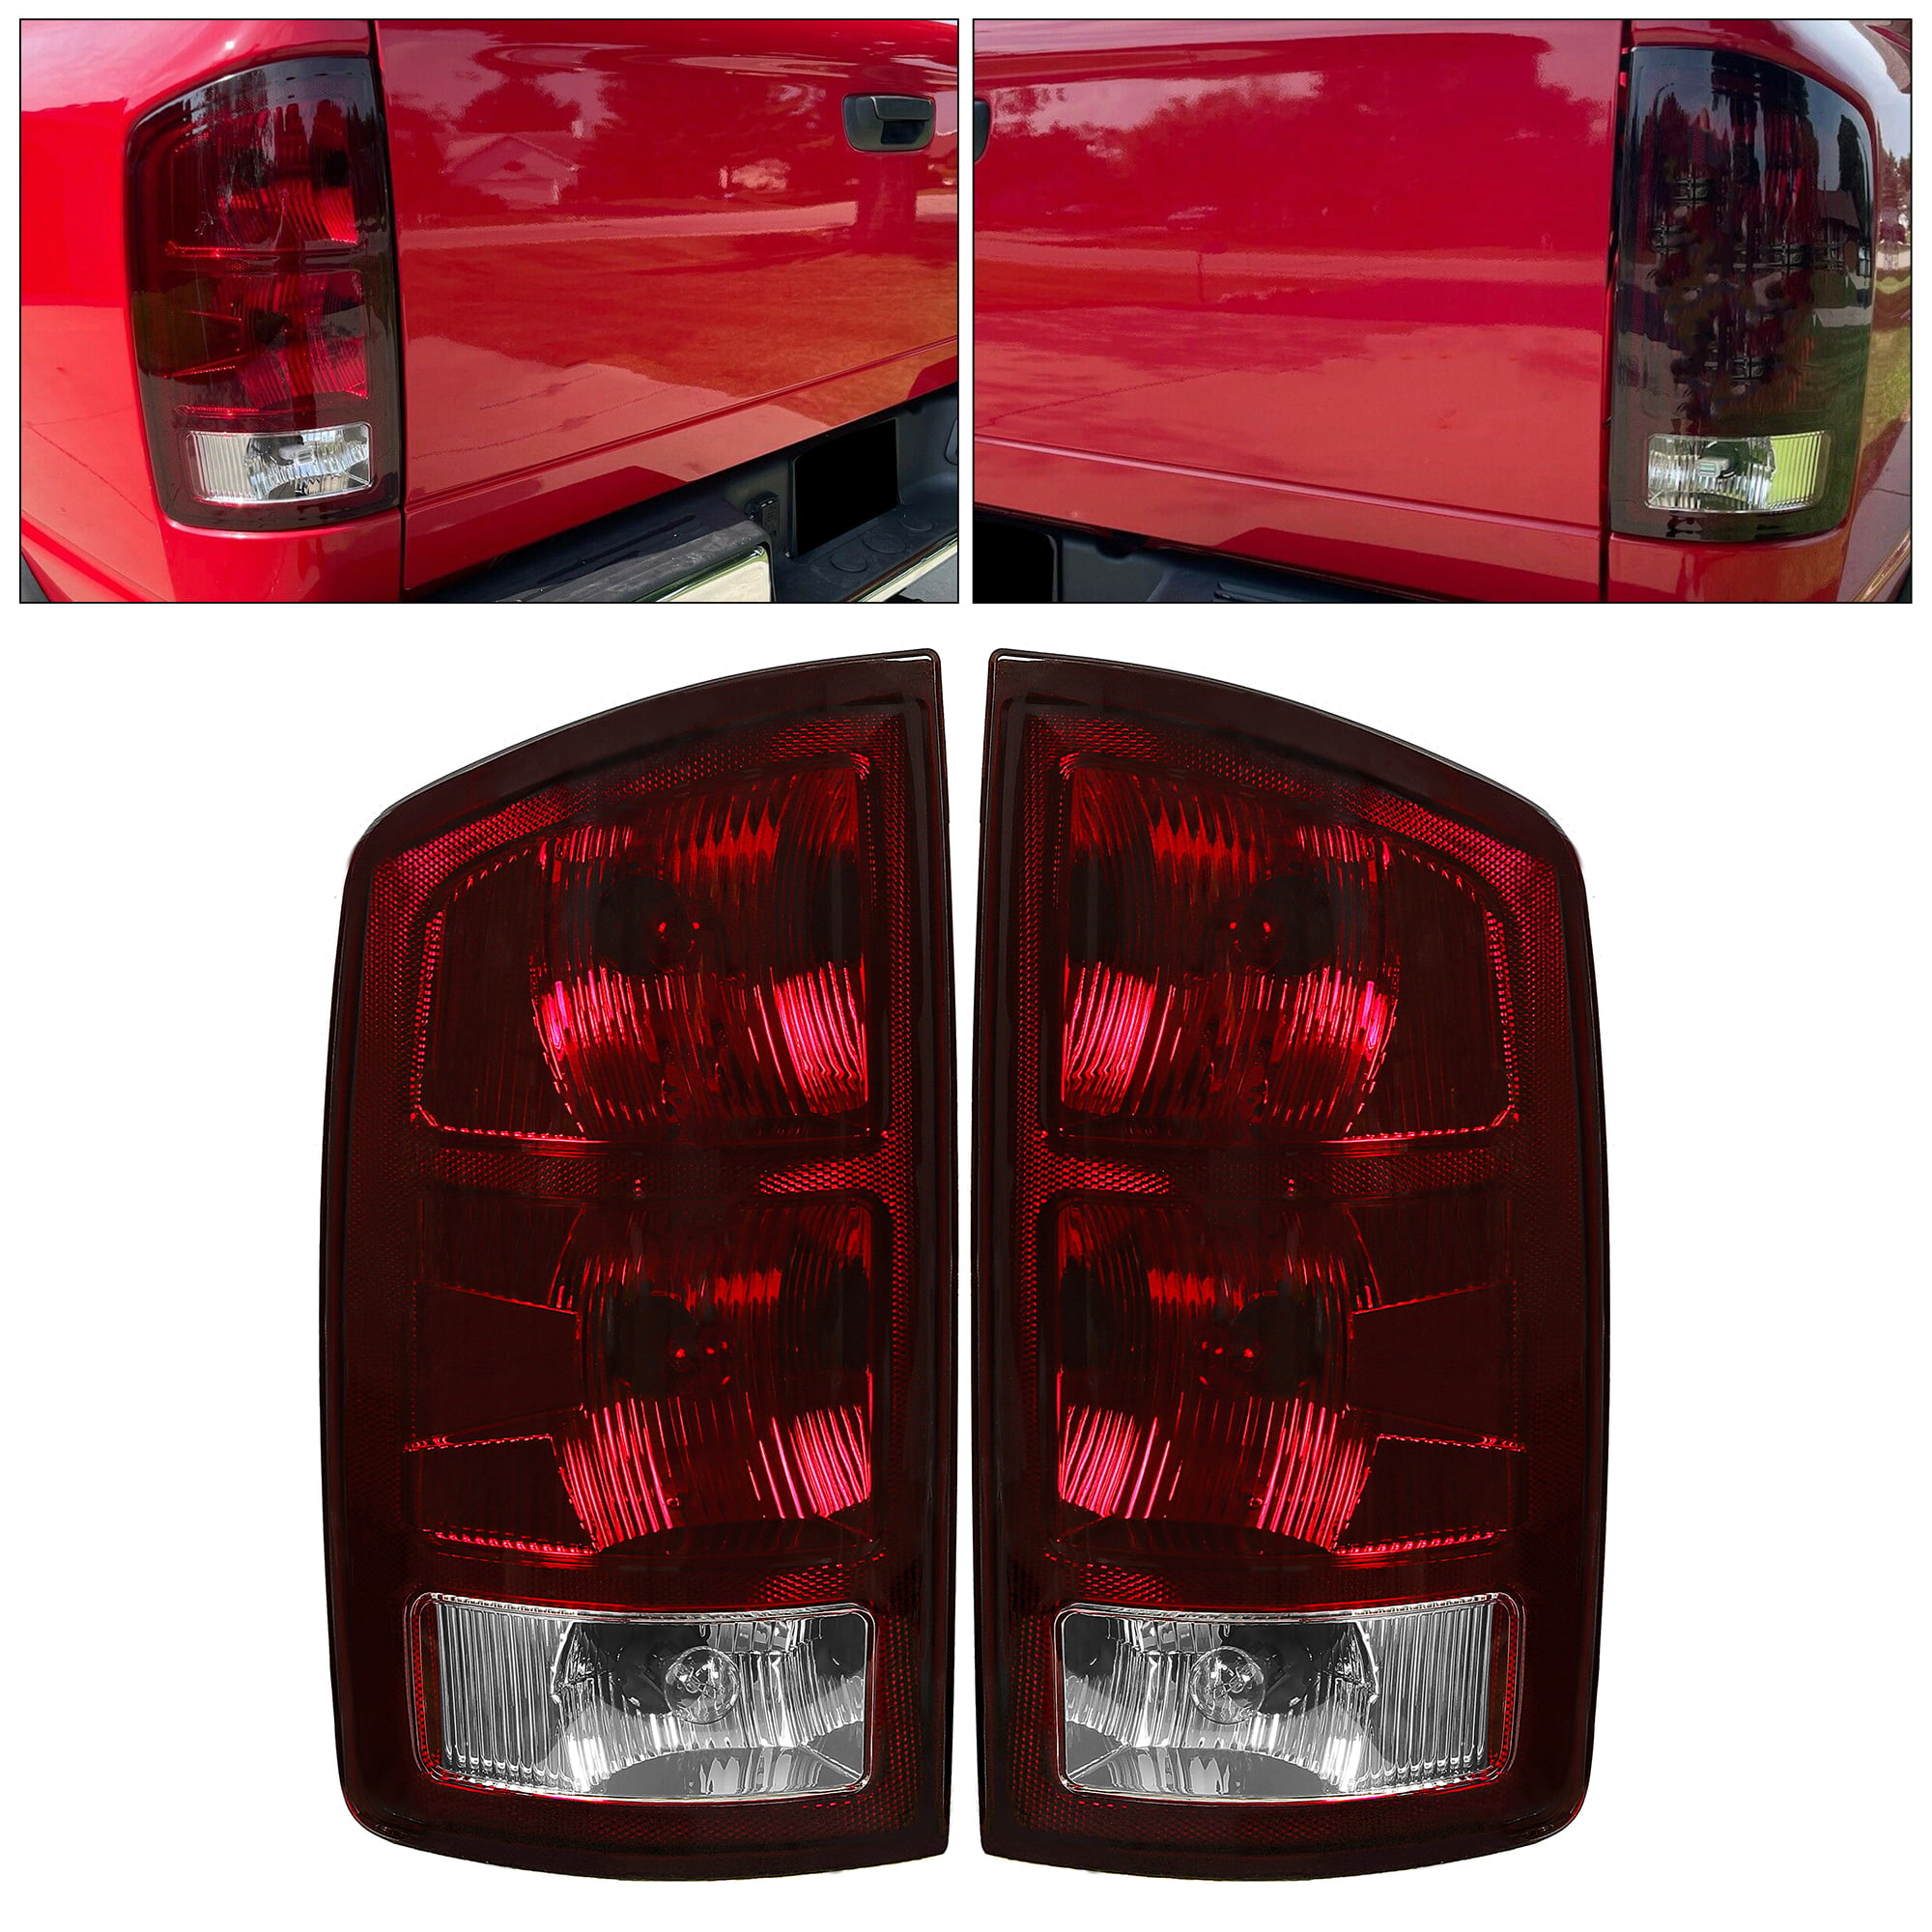 ECOTRIC Compatible with 2002-2006 Dodge Ram 1500 Set of 2 2003-2006 Ram 2500 3500 Red Smoked Tail Light Taillight Turn Signal Light Pair Replacement for 55077348AF CH2801147 55077347AF CH2800147 